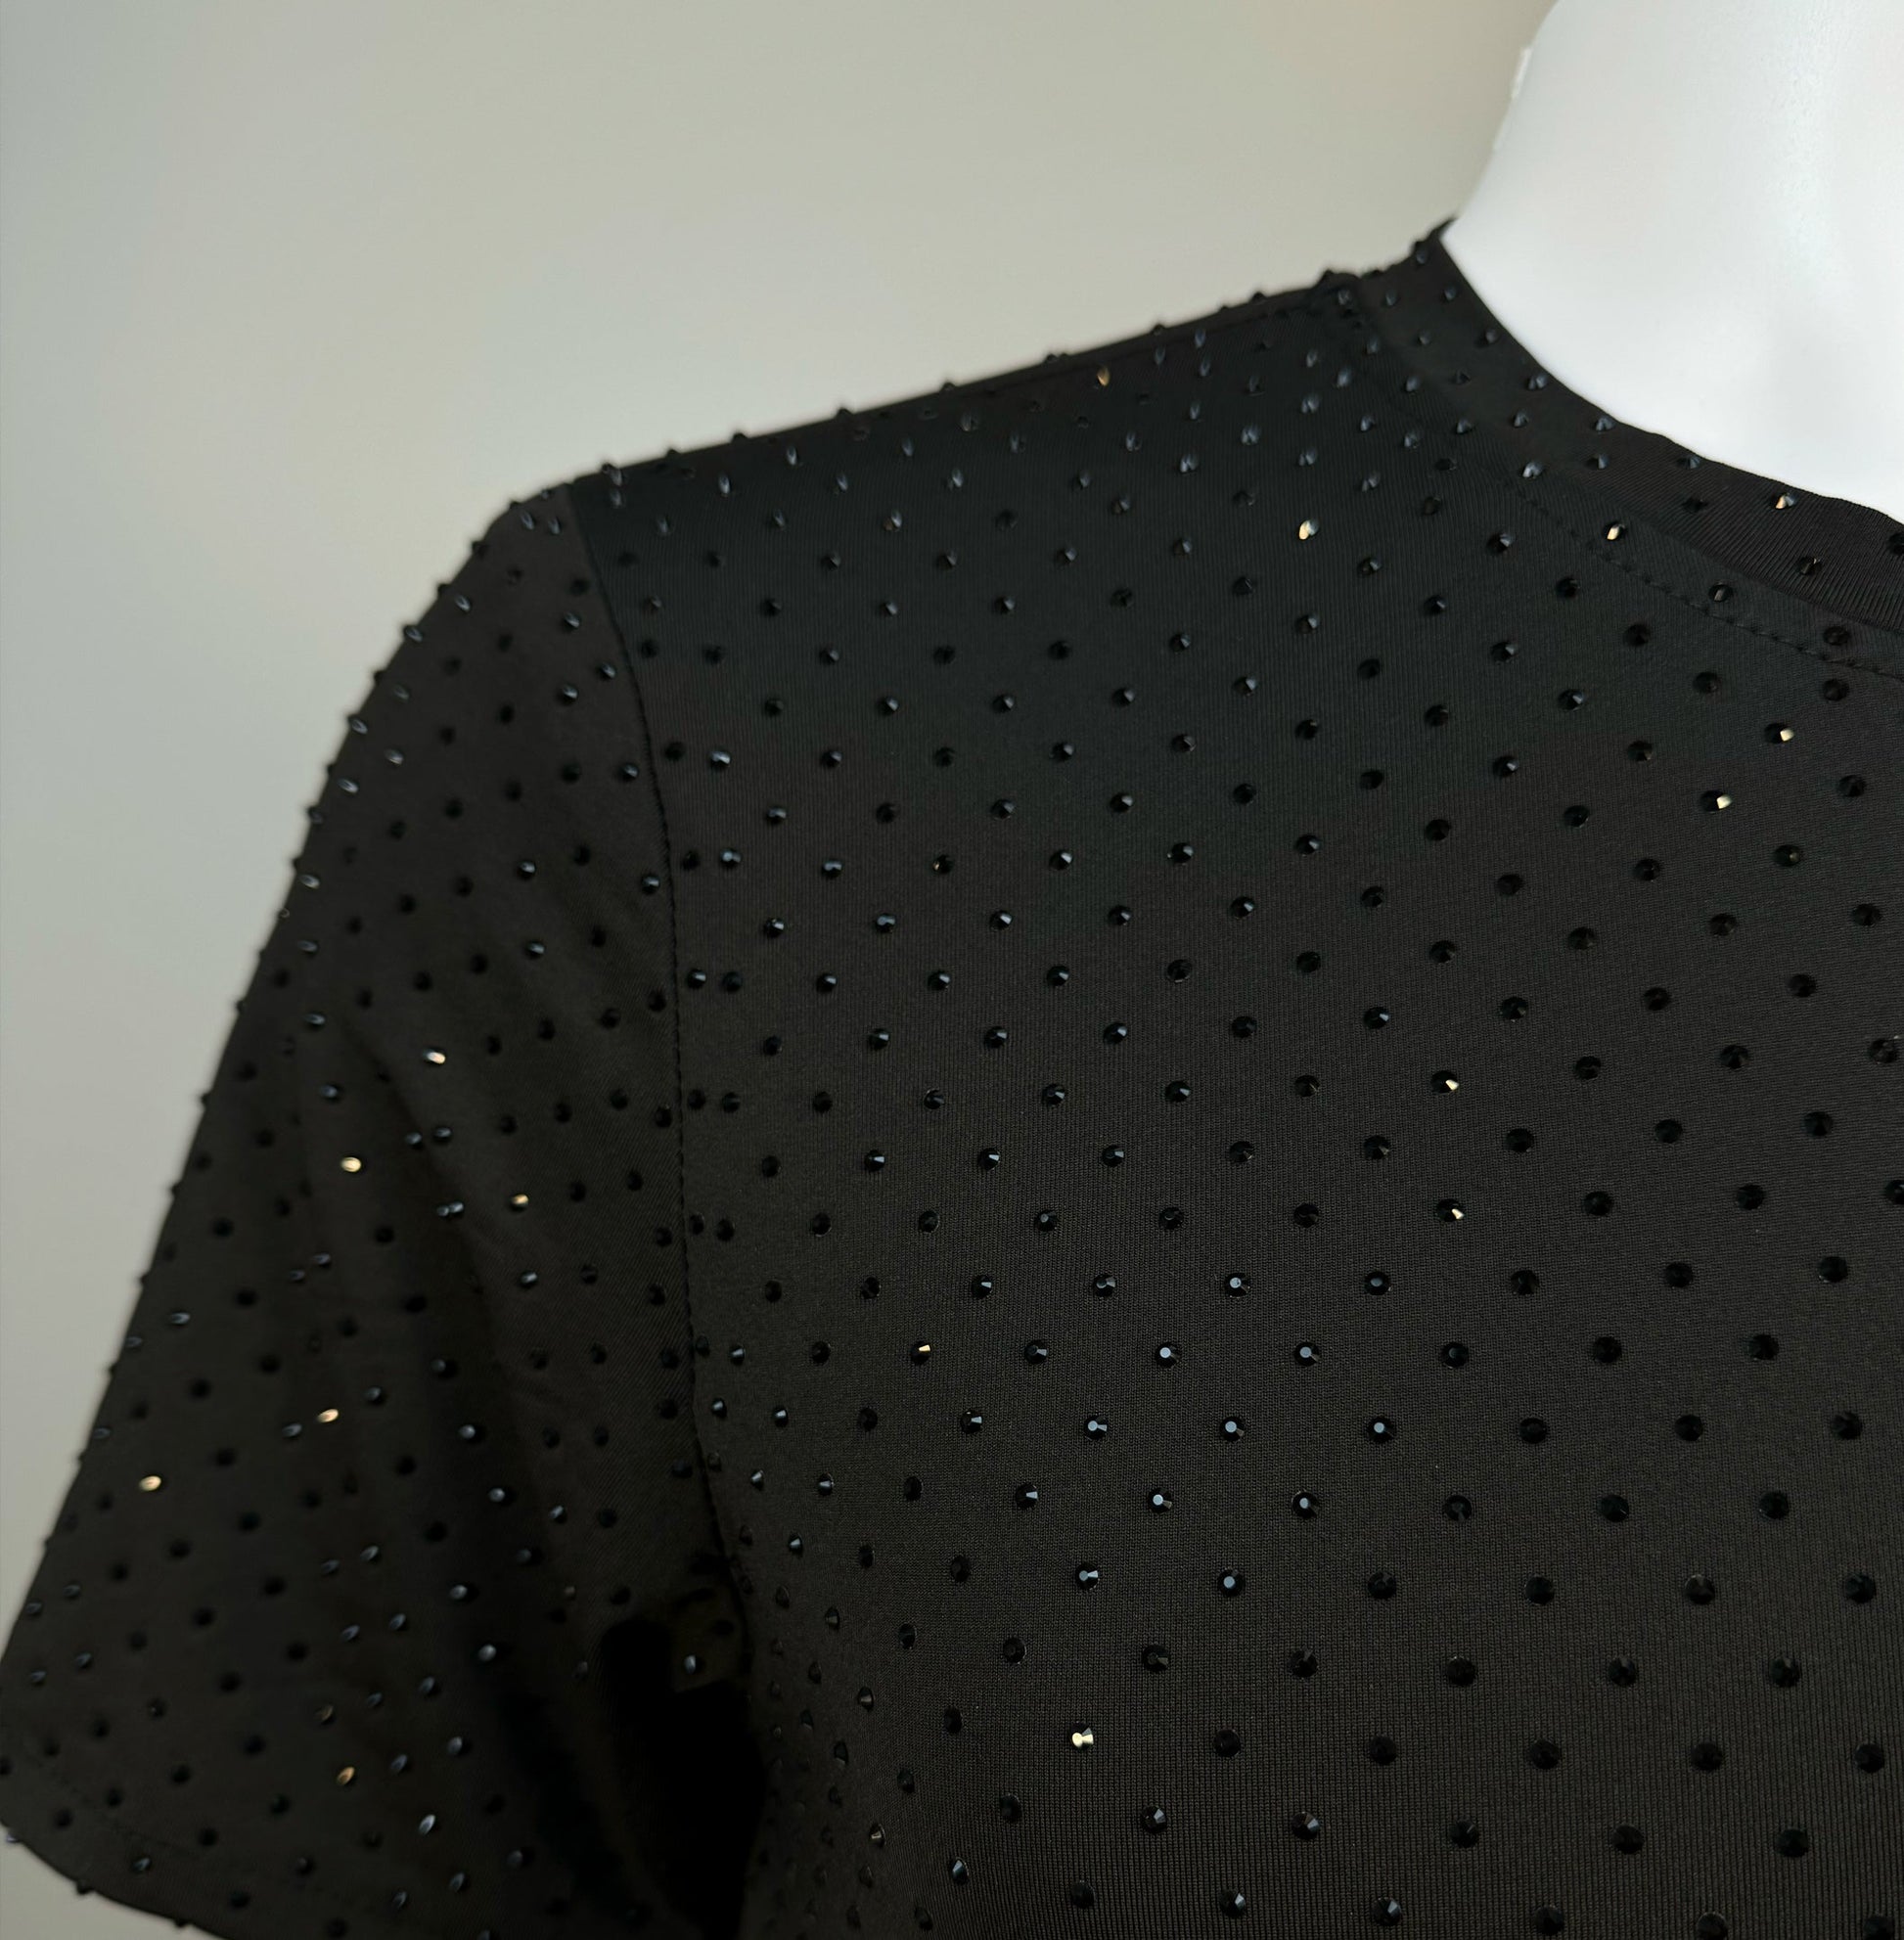 Shoulder detail of Jet Black Crystals on Black Fabric Dotted T-shirt revealing the impeccable construction of this complex garment.